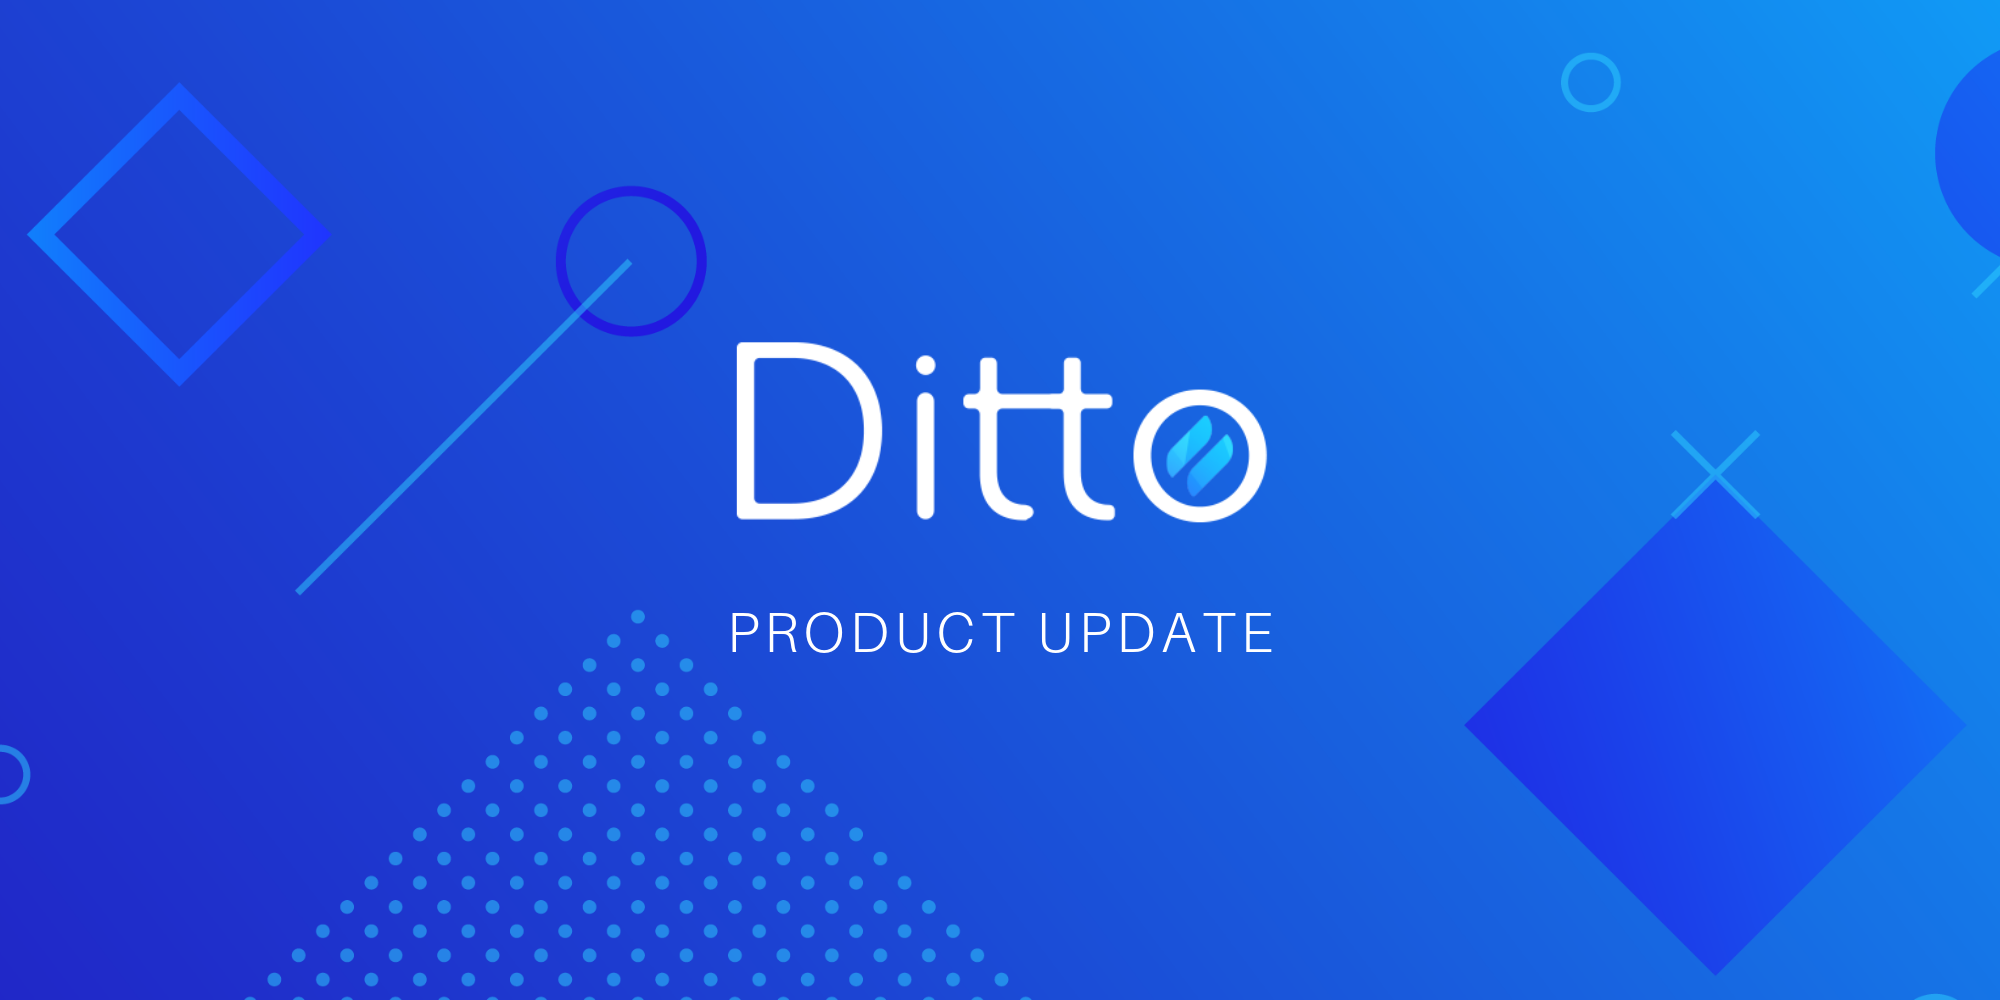 New Ditto Update Increases Security and Boosts Performance - Featured Image